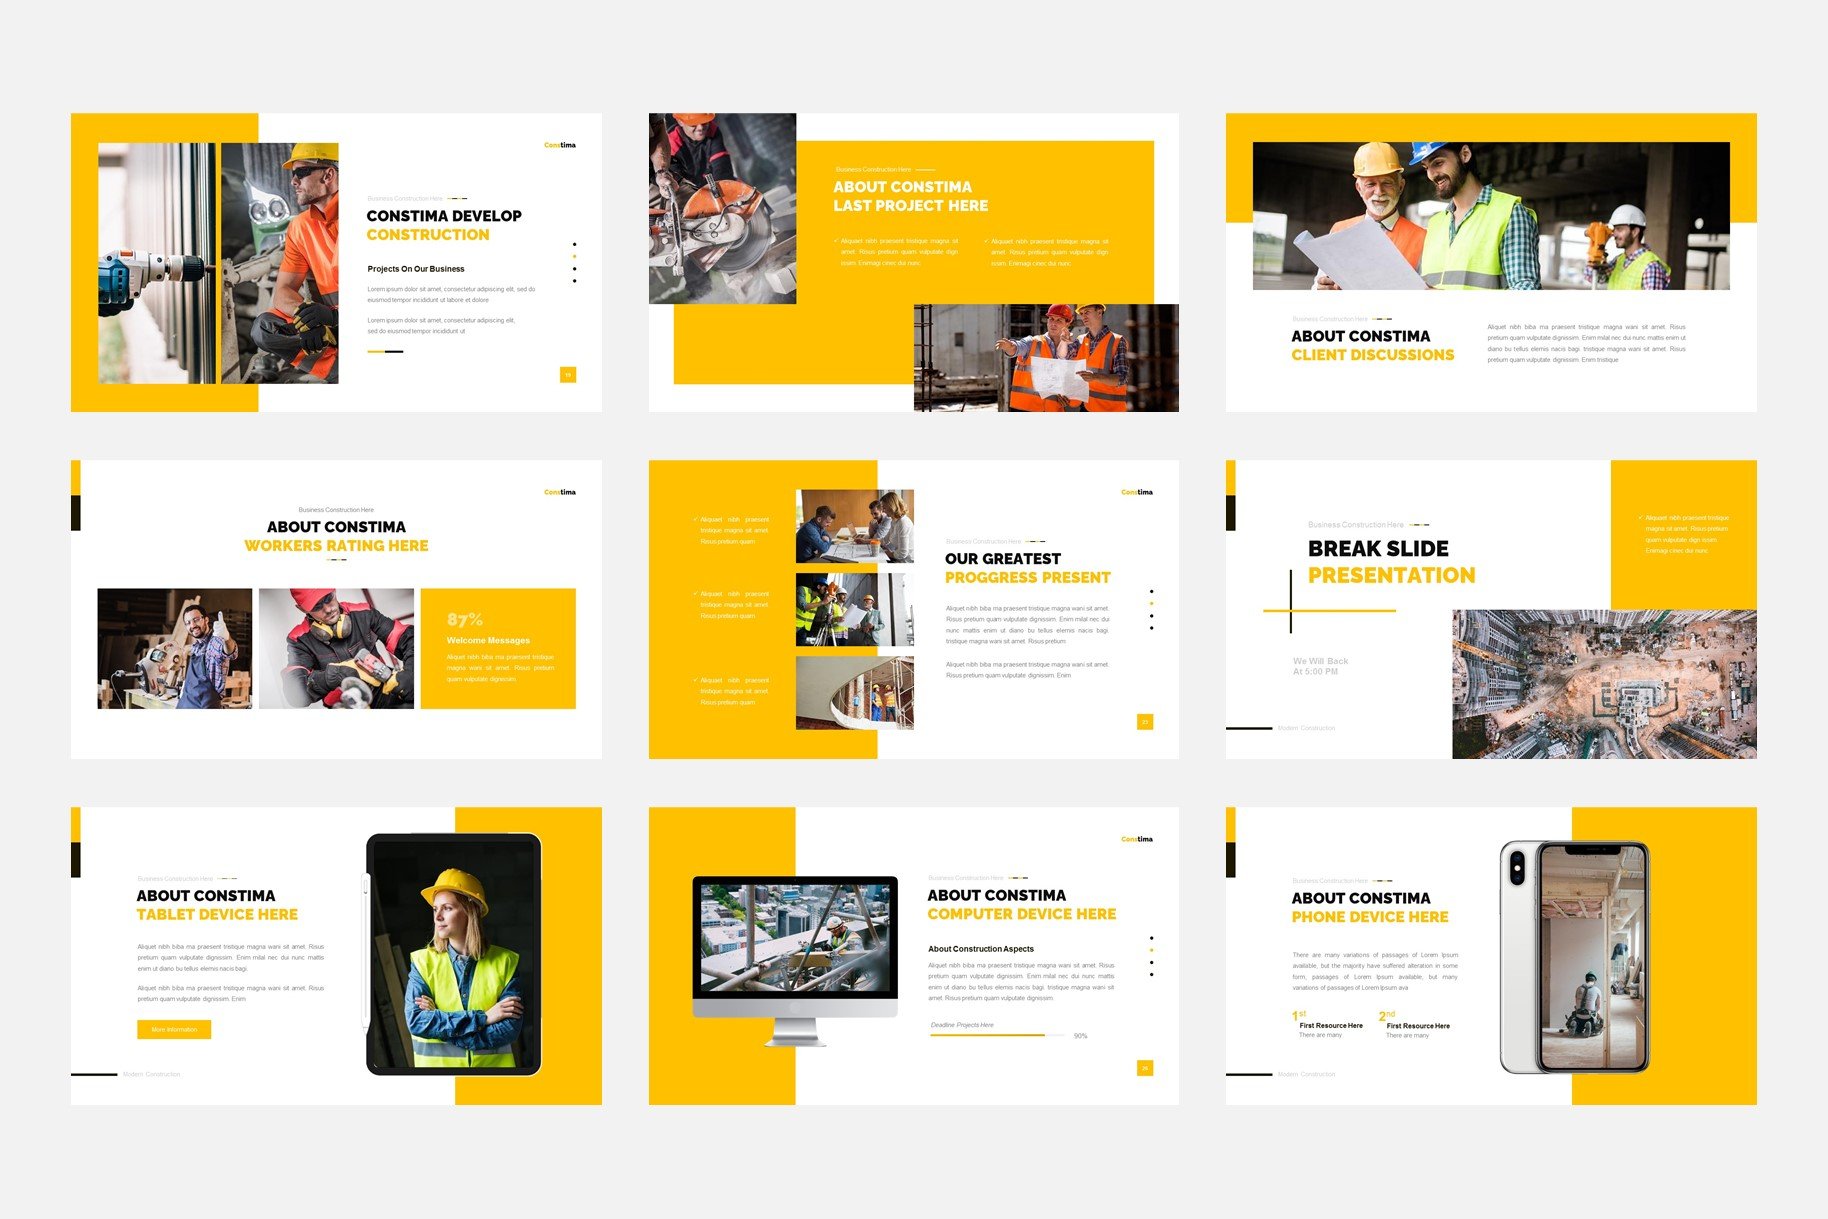 Constima Construction Presentation is a mobile friendly template with an adaptive design.